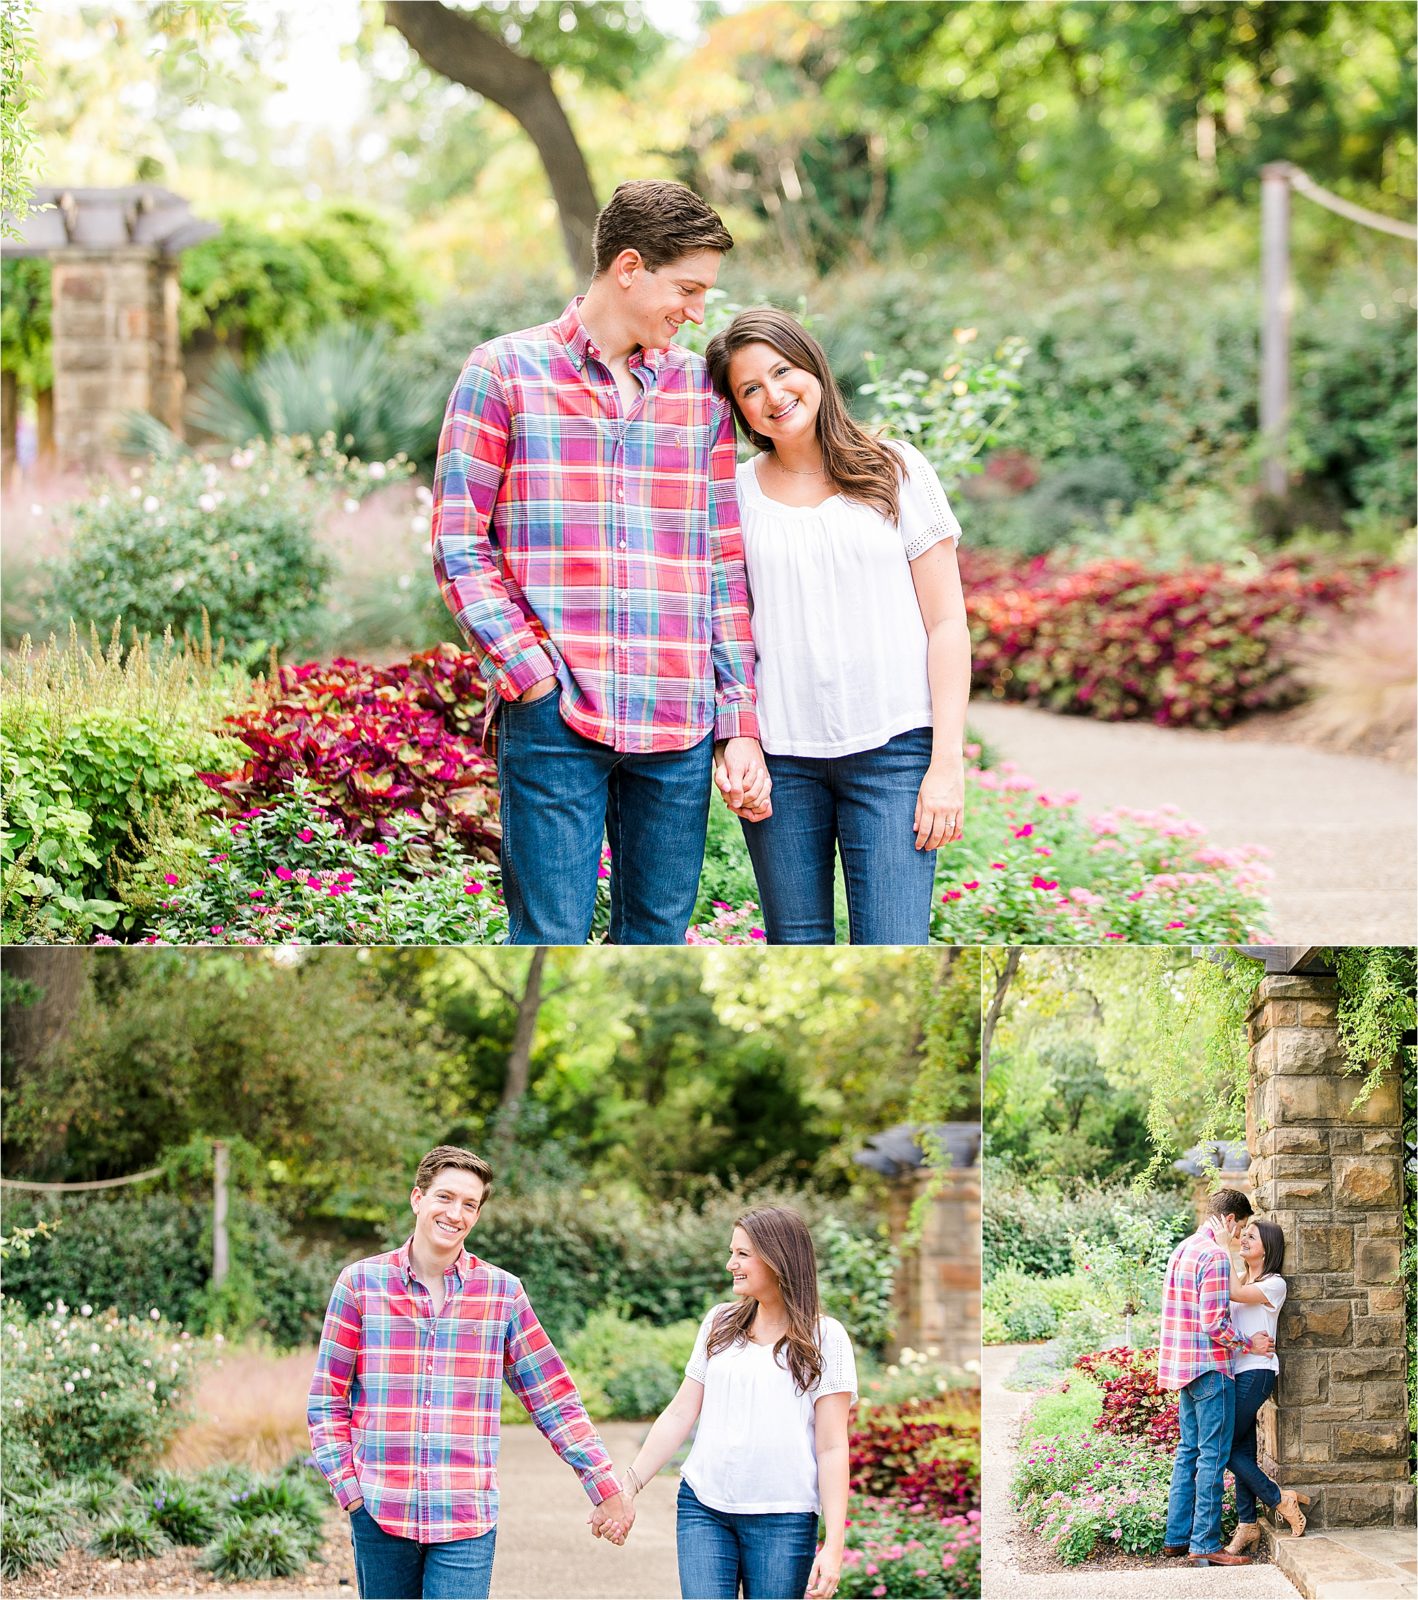 A couple walking through the Fort Worth Botanic Gardens on a sunny, fall day during their engagement session with Dfw engagement Photographer Jillian Hogan